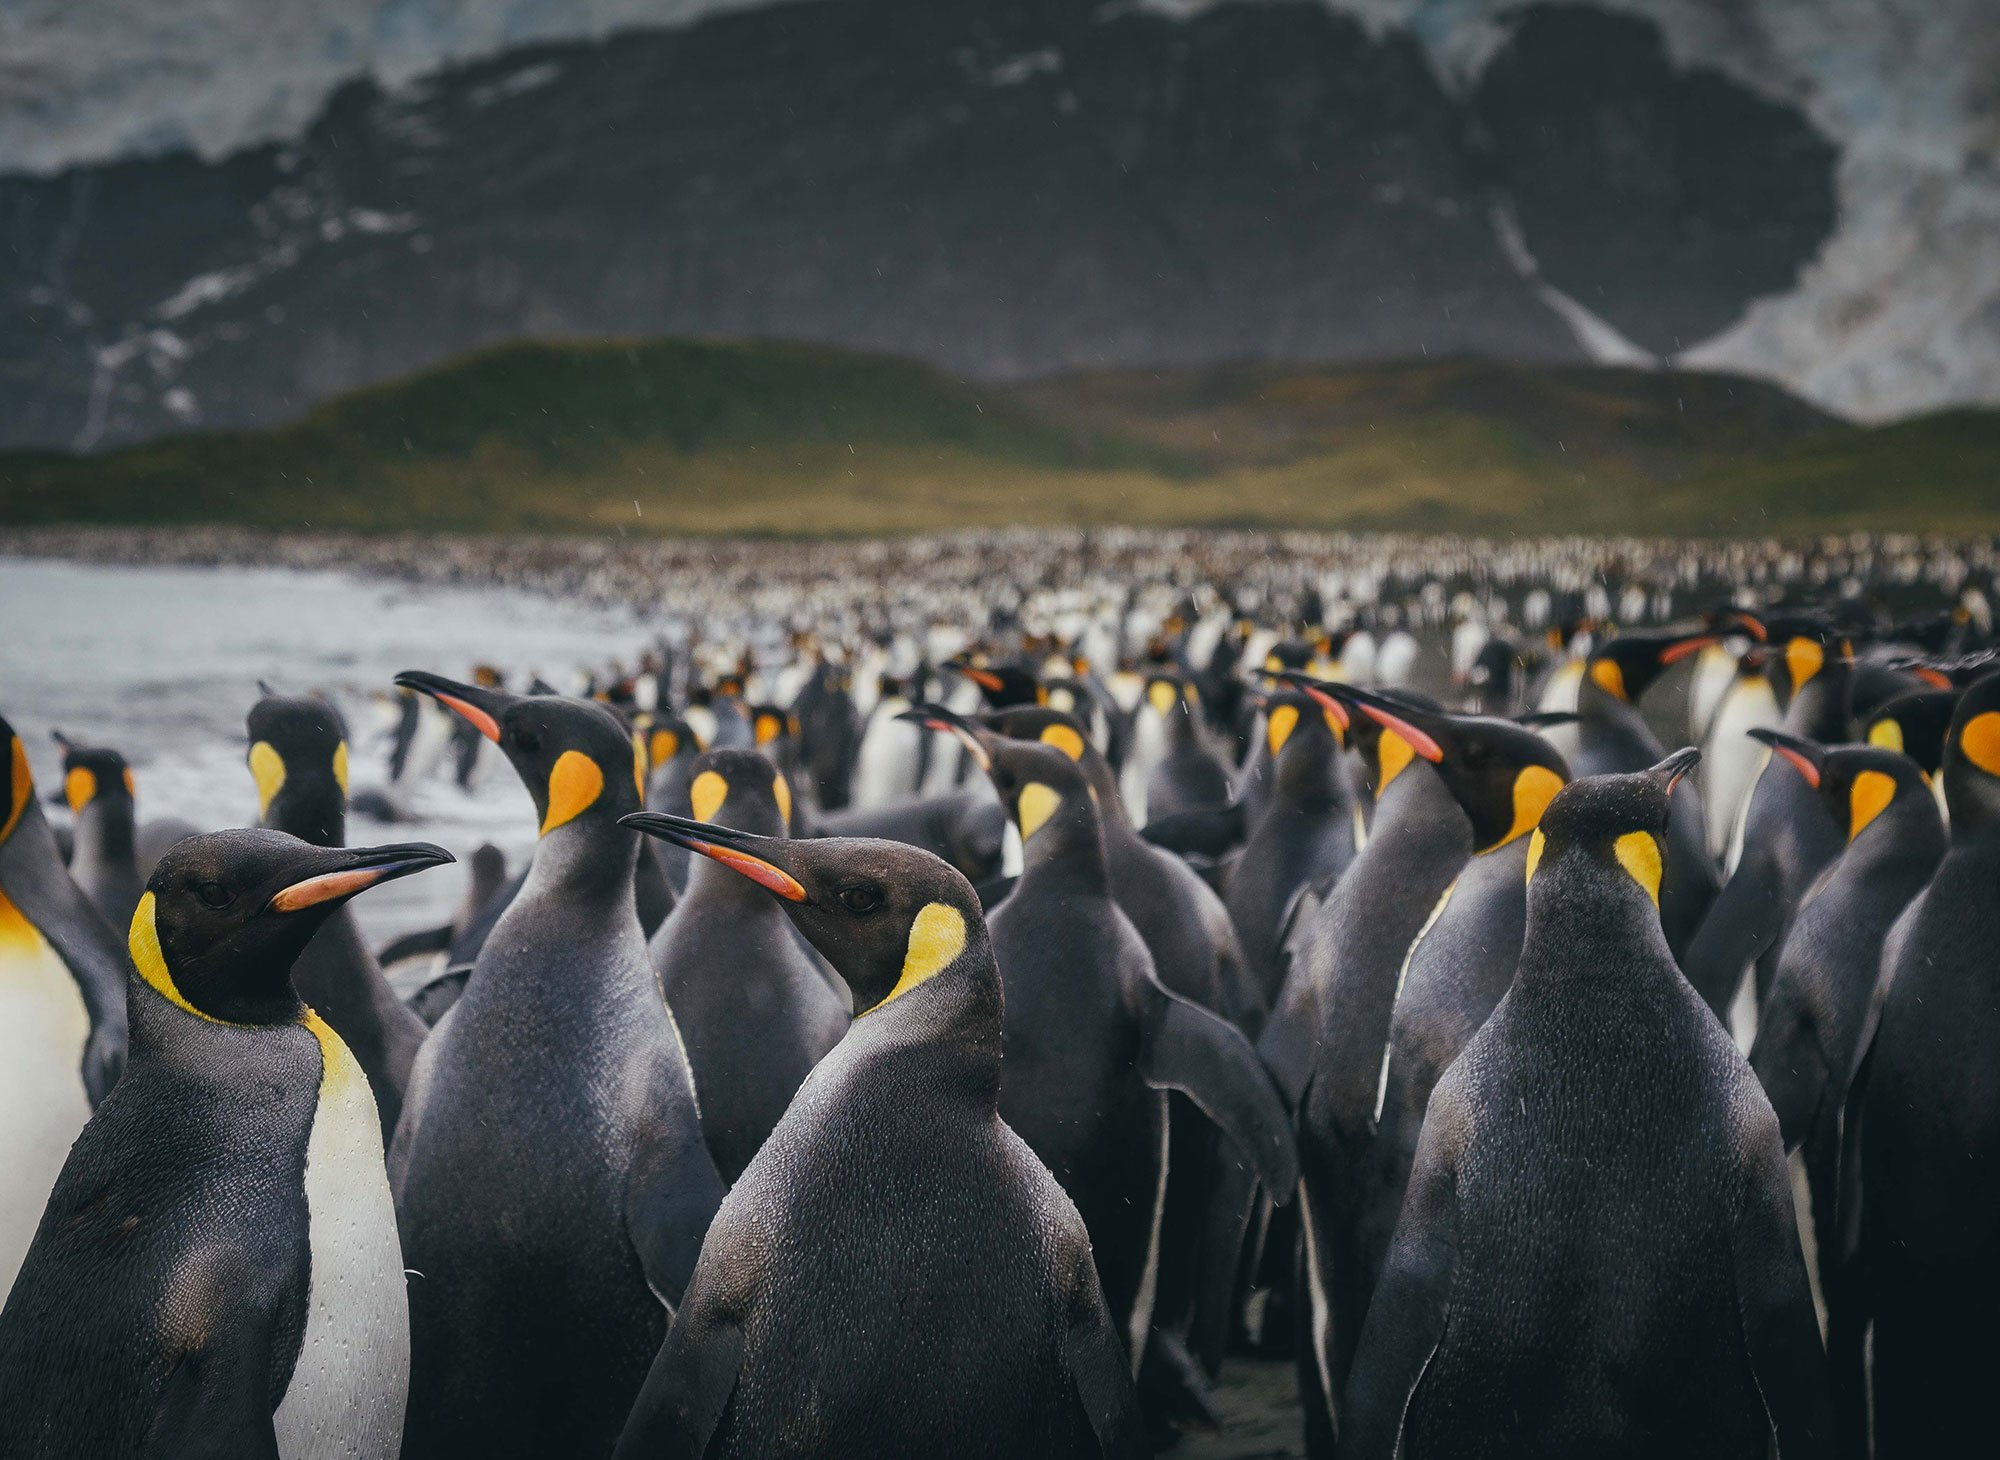 A large rookery of penguins in Gold Harbor, South Georgia, a wildlife-rich island in sub-Antarctica.